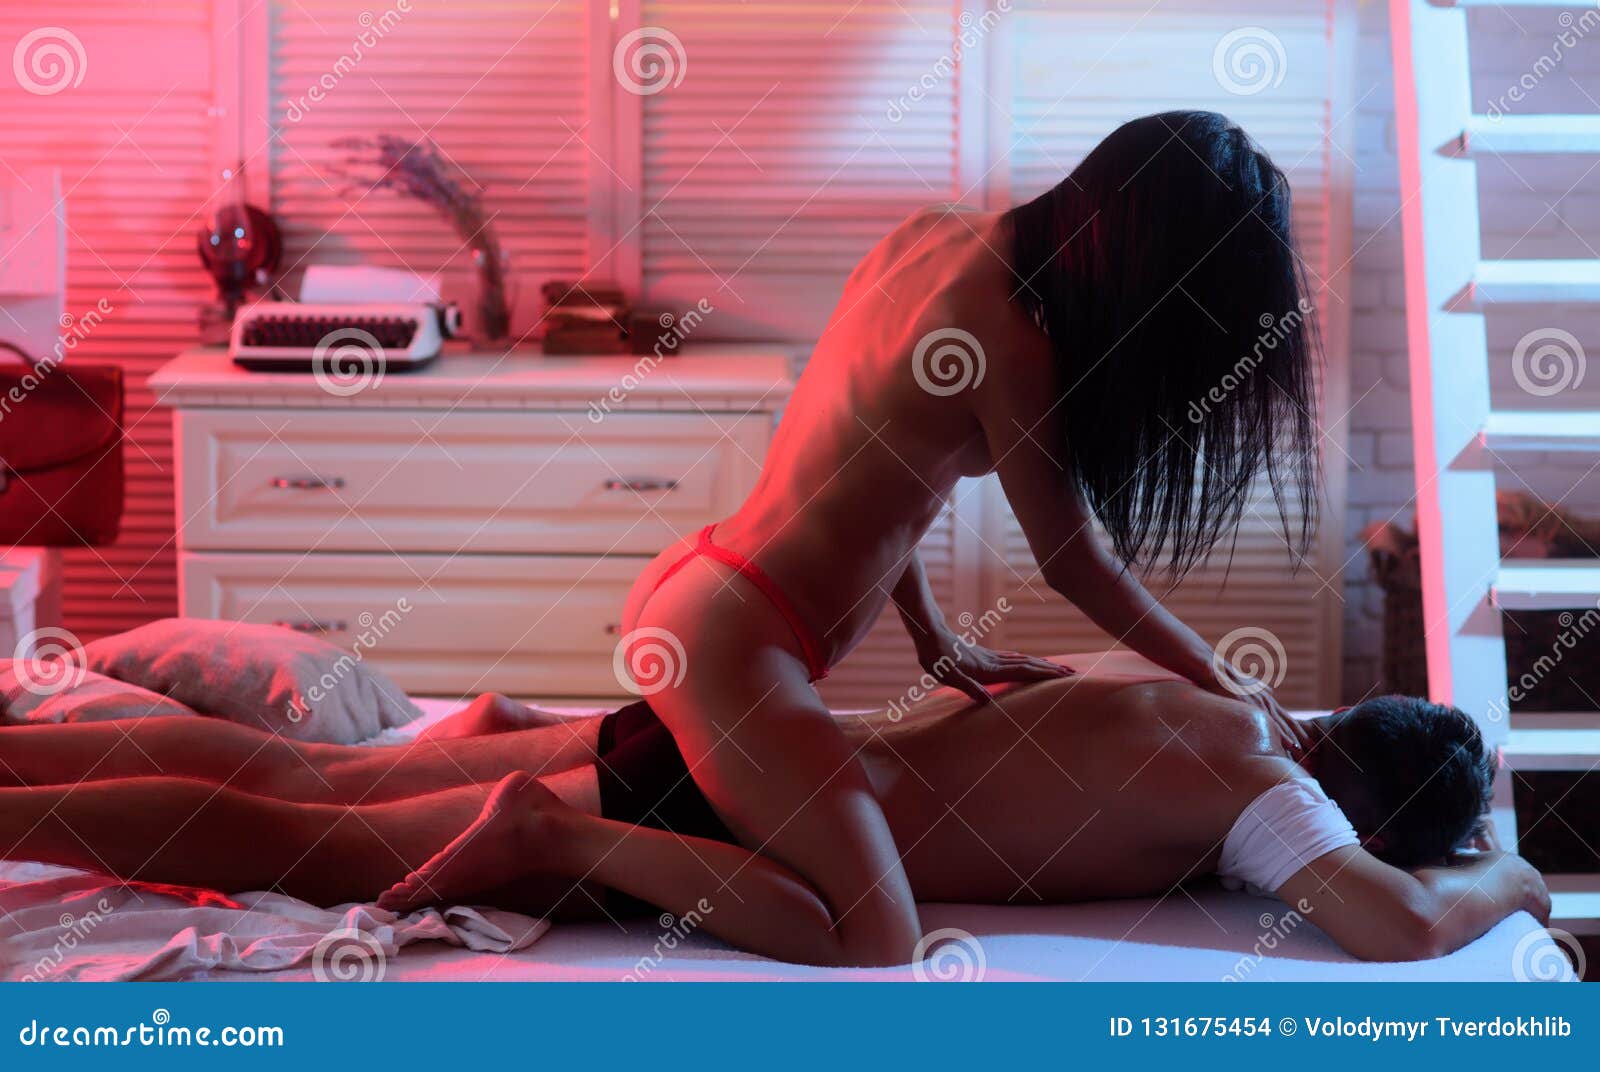 Night Woman and Good Night. Couple Relaxed in Bed. Woman Make Sensual Massage image photo image